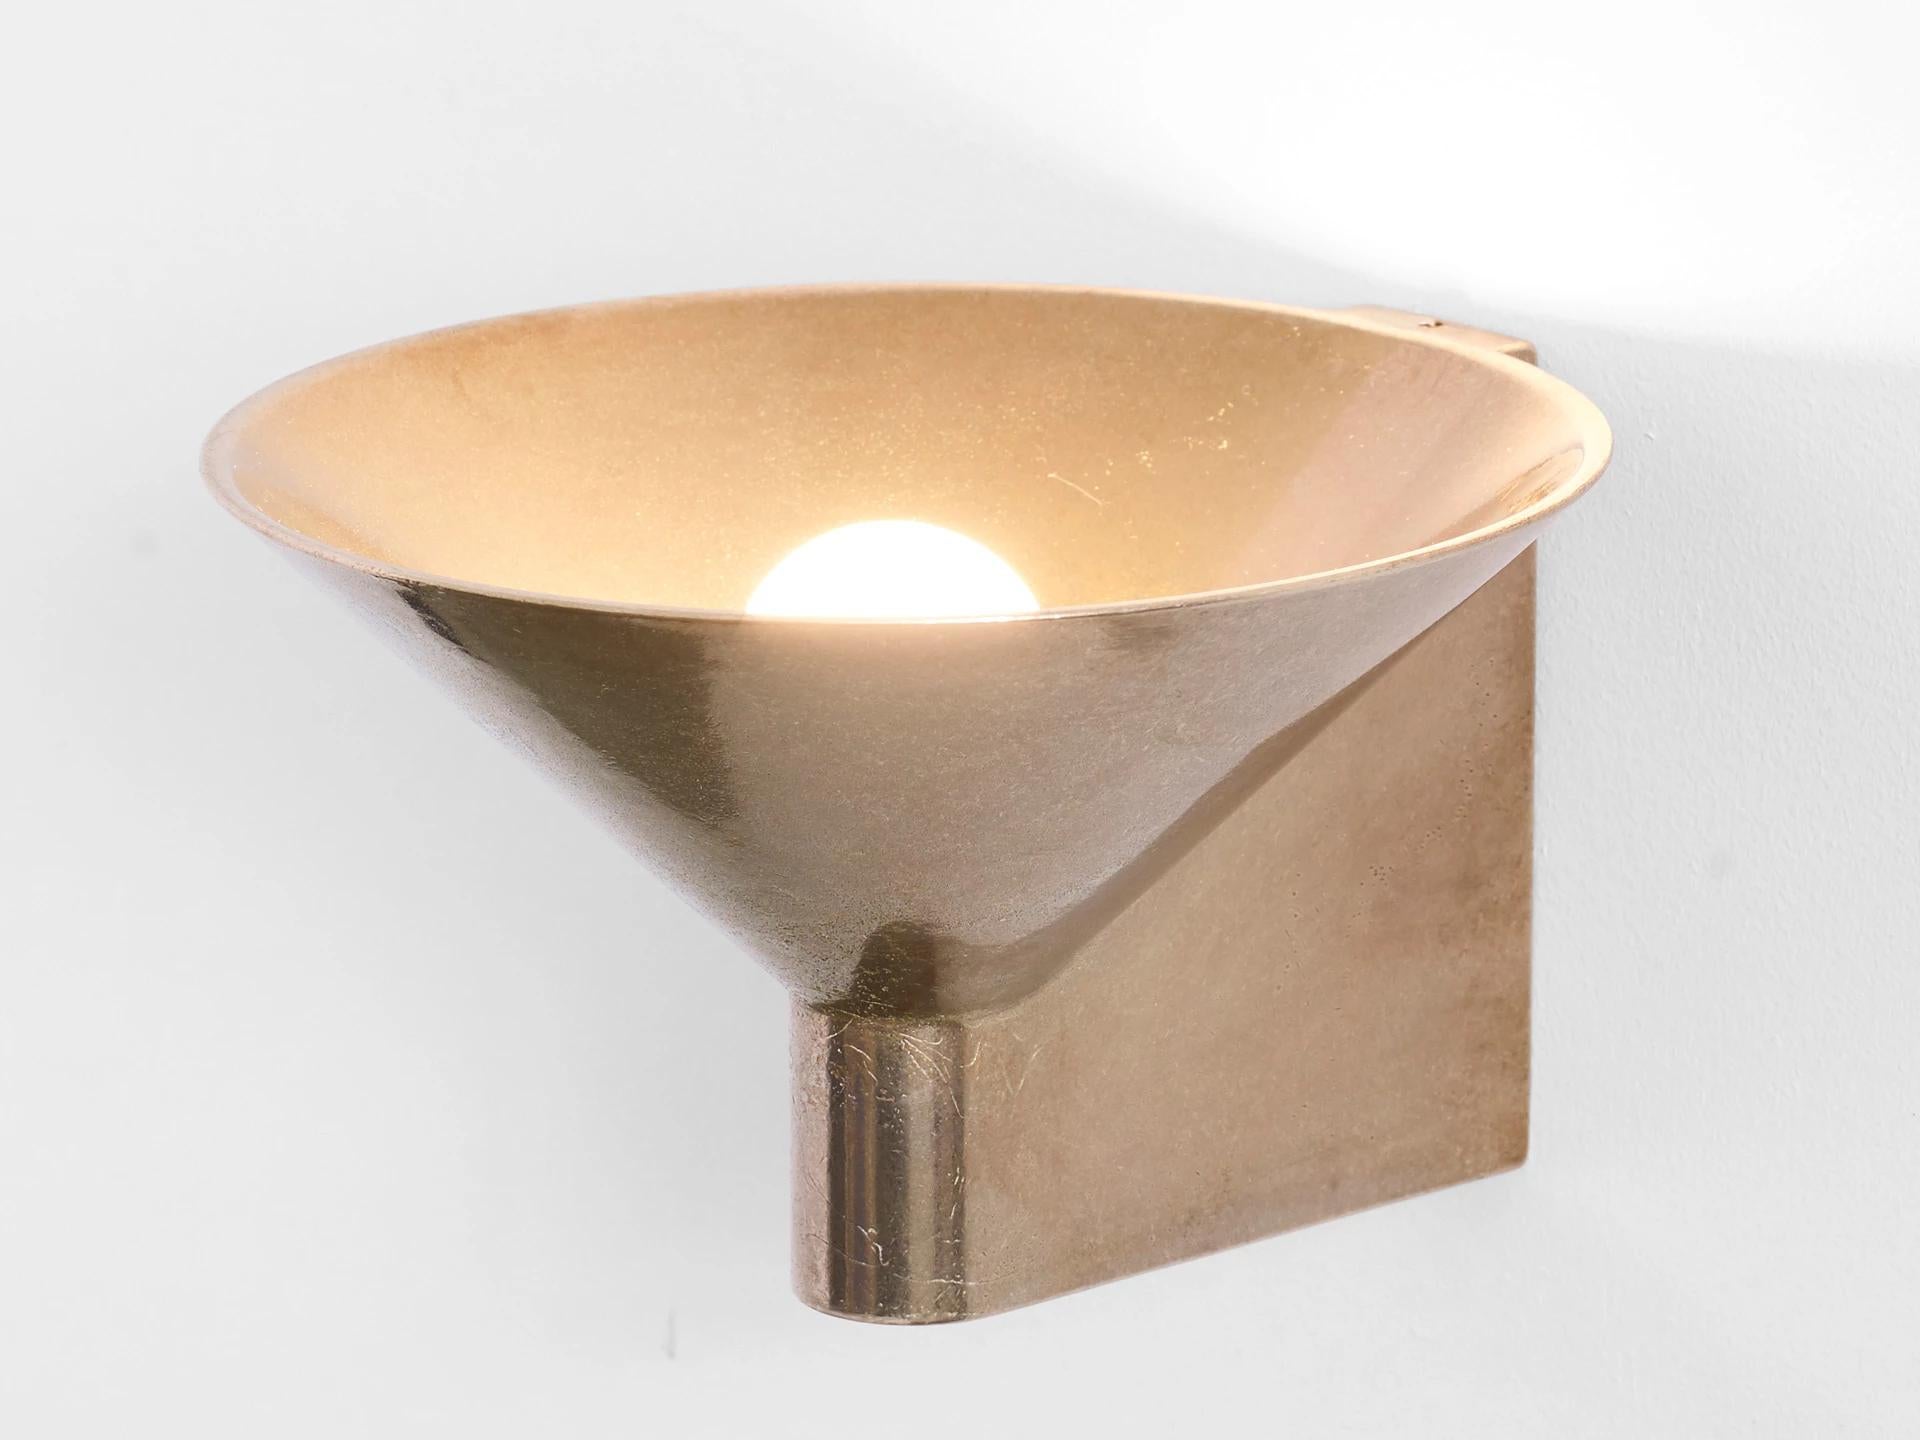 Sculpted bronze sconce light by Henry Wilson
Lost wax cast in solid bronze, the conical up light is our most complex production casting to date. Each piece is hand finished and can be mounted to any surface as an up or down light, using a discrete